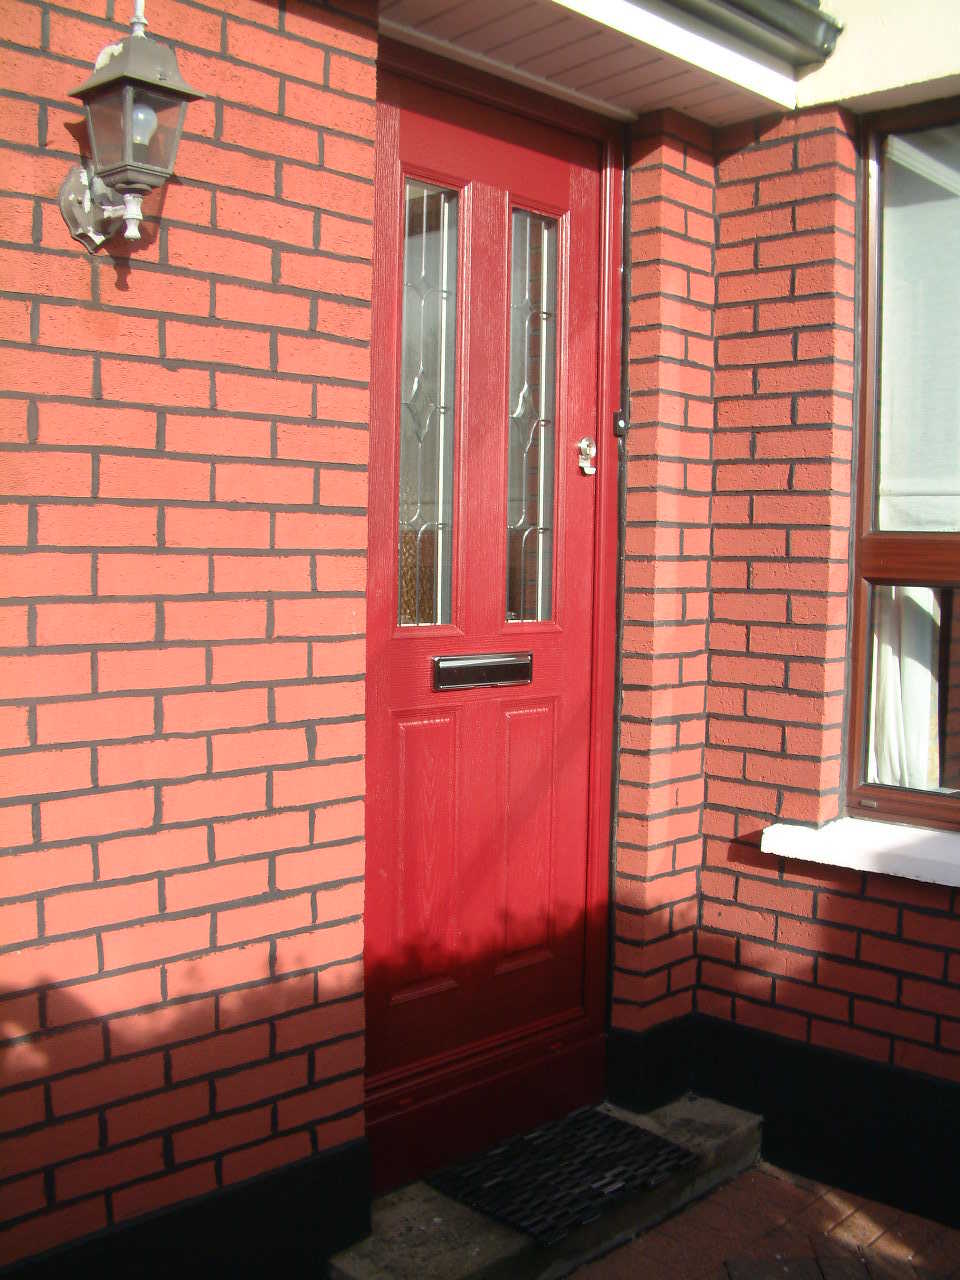 RED APEER APM2 COMPOSITE FRONT DOOR FITTED BY ASGARD WINDOWS IN DUBLIN